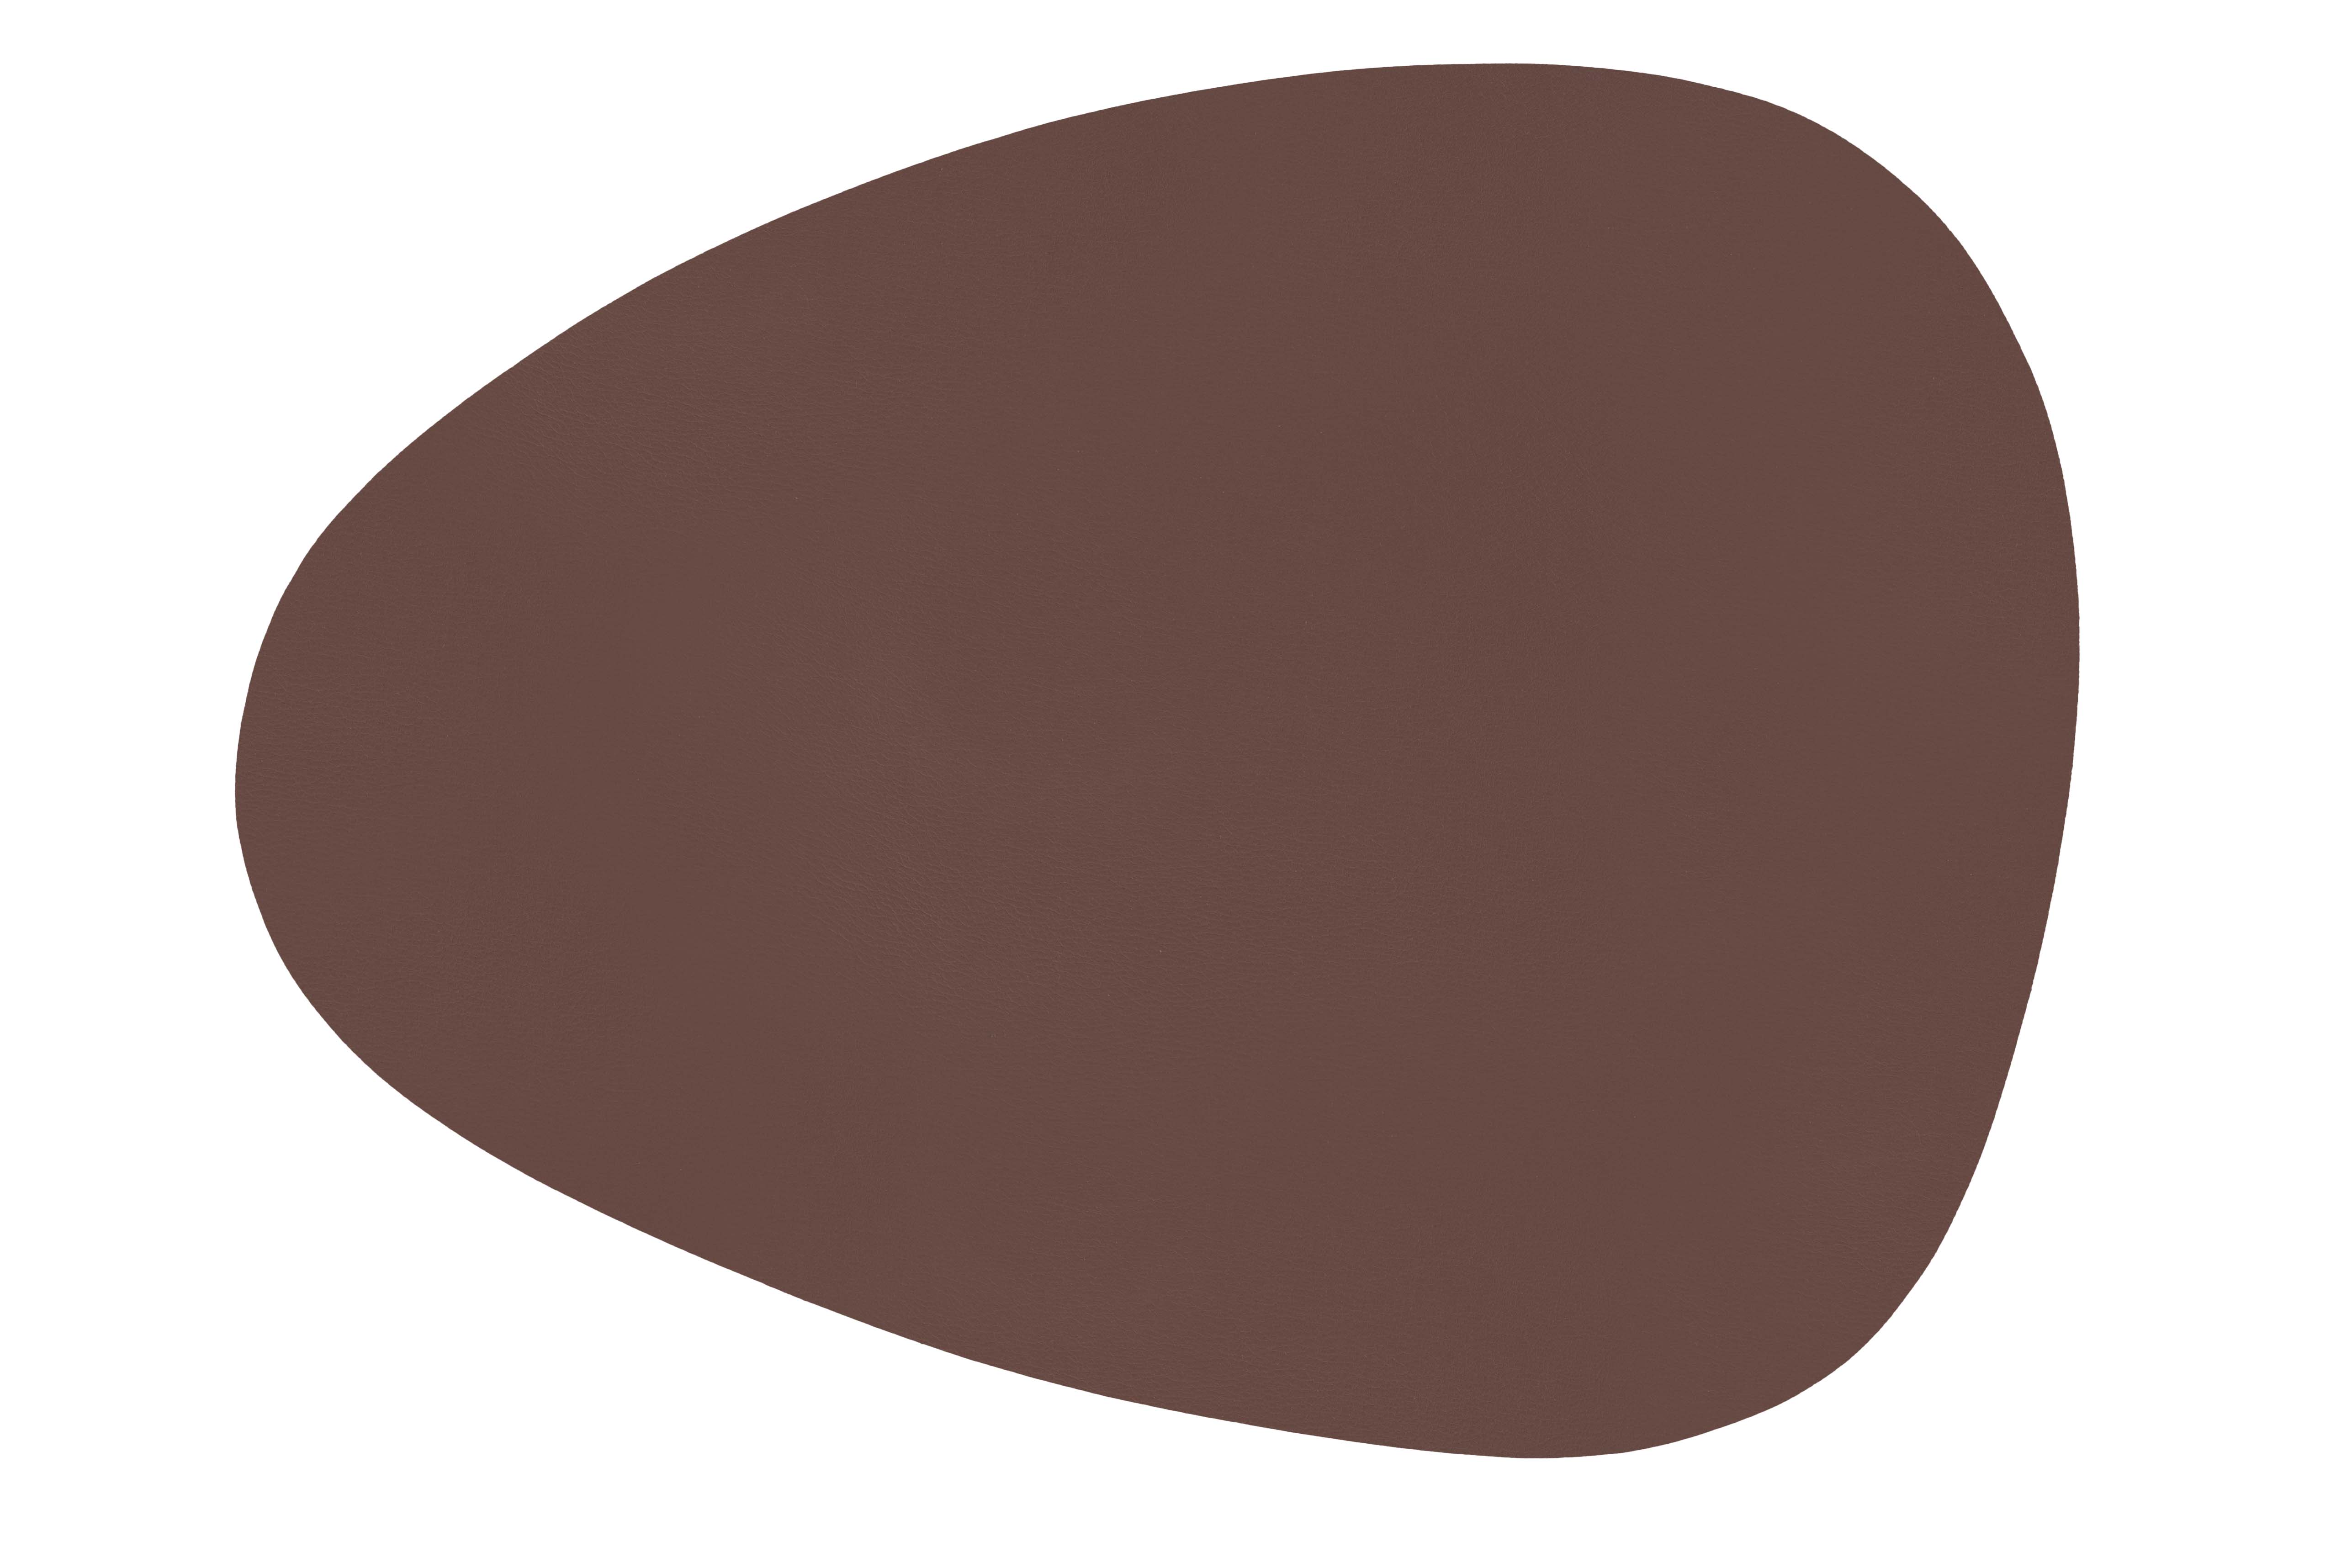 Placemat STONE - TOGO - 43x22cm, brown